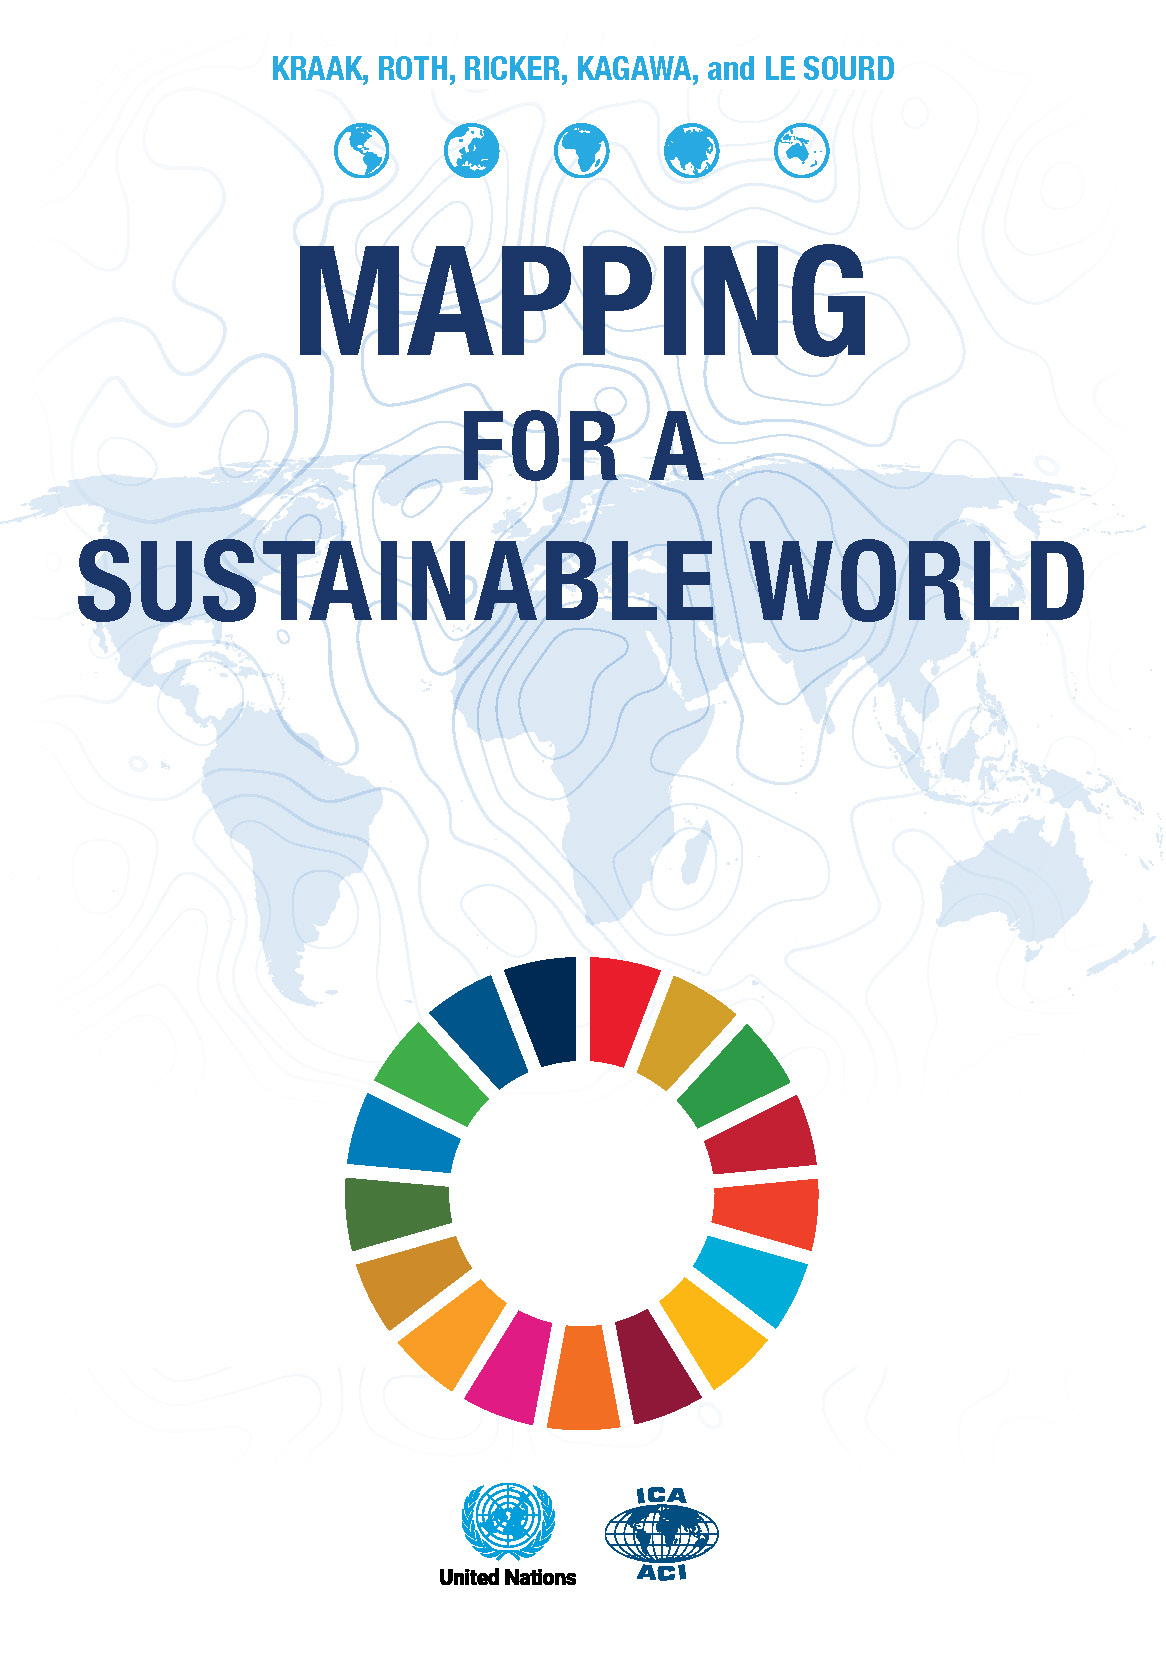 Image of the cover for the report "Mapping for a Sustainable World" by the United Nations.